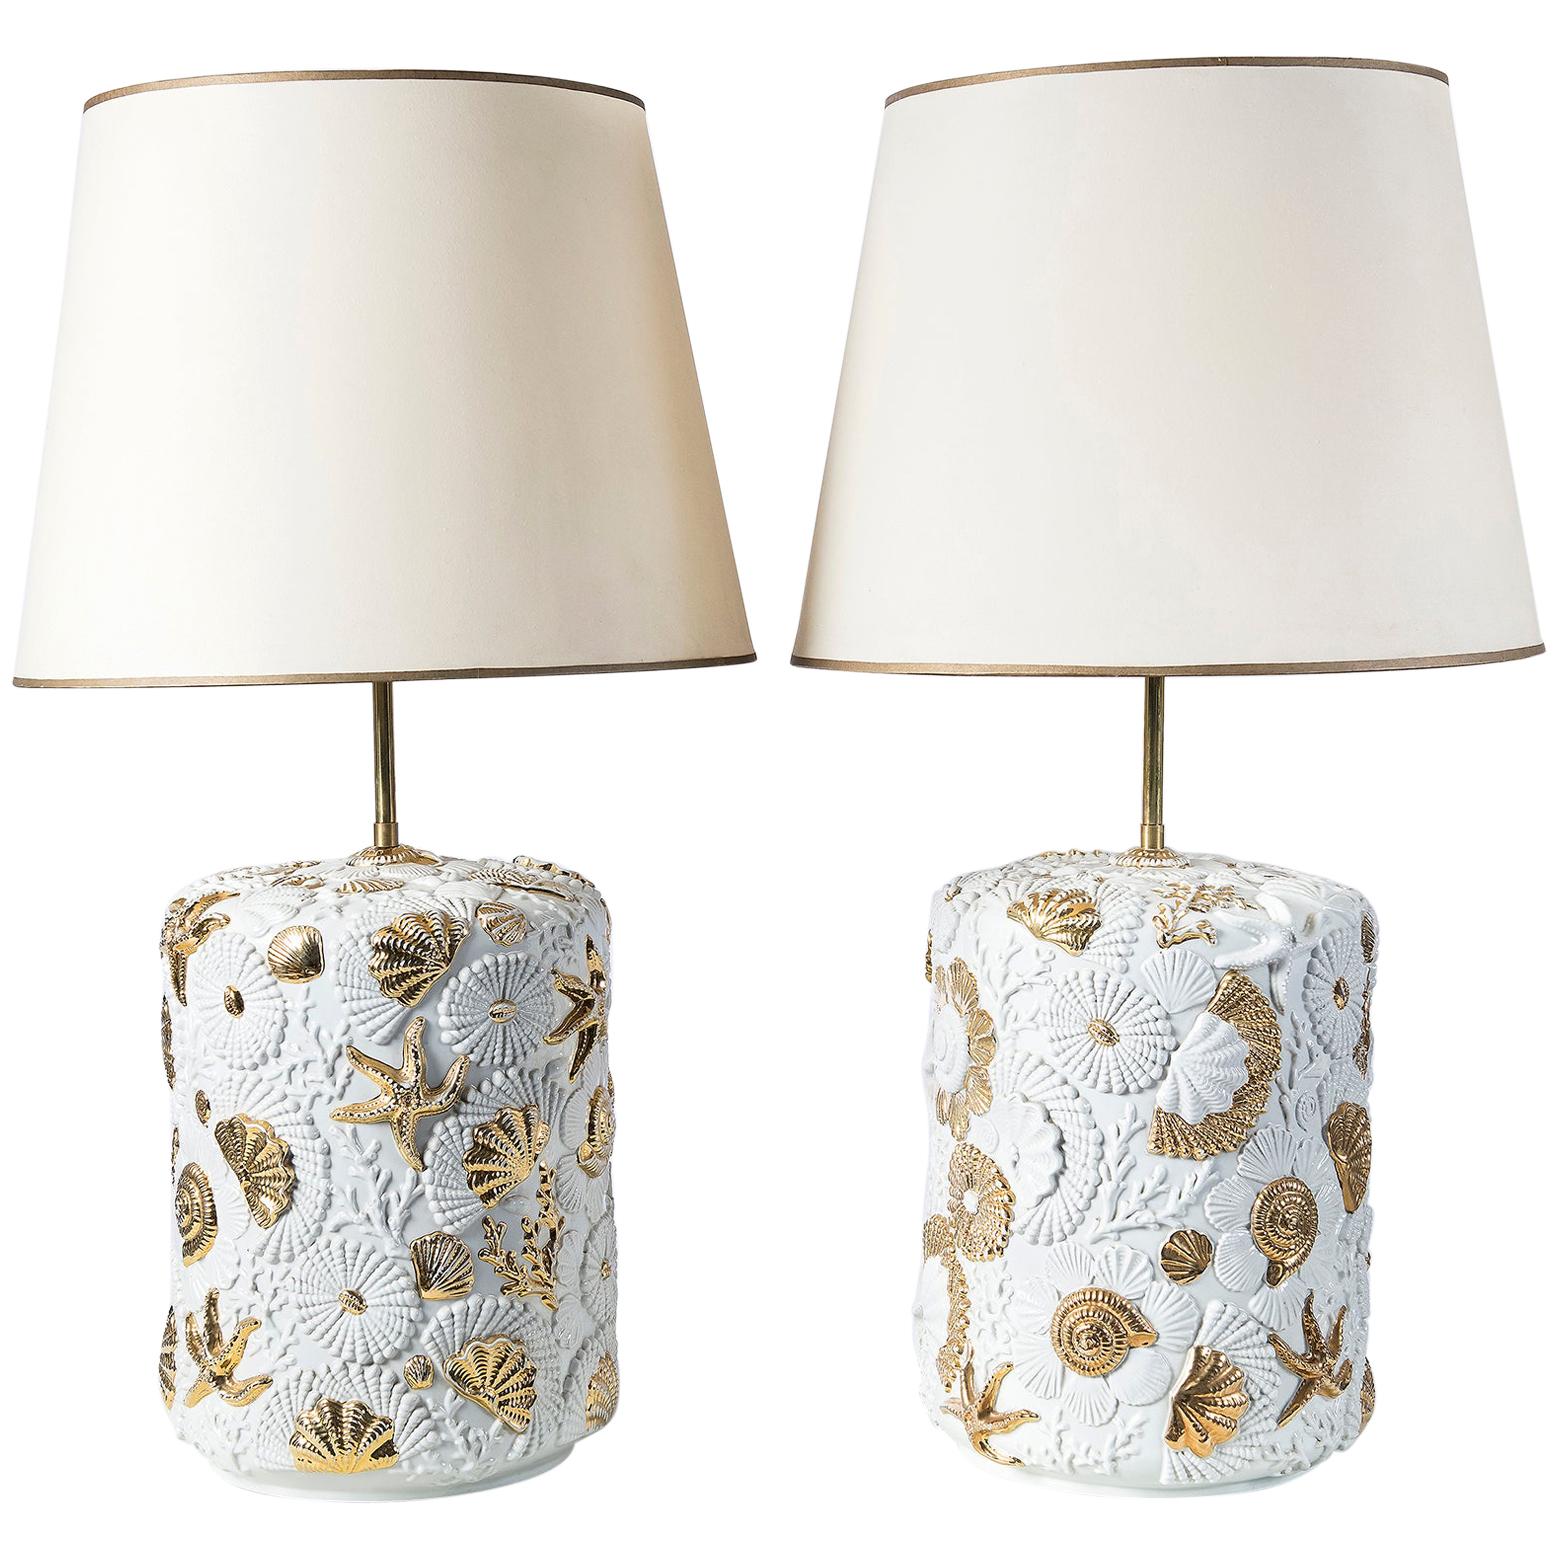 Pair of Porcelain Table Lamps, Porcellane San Marco Manufacture, Italy For Sale